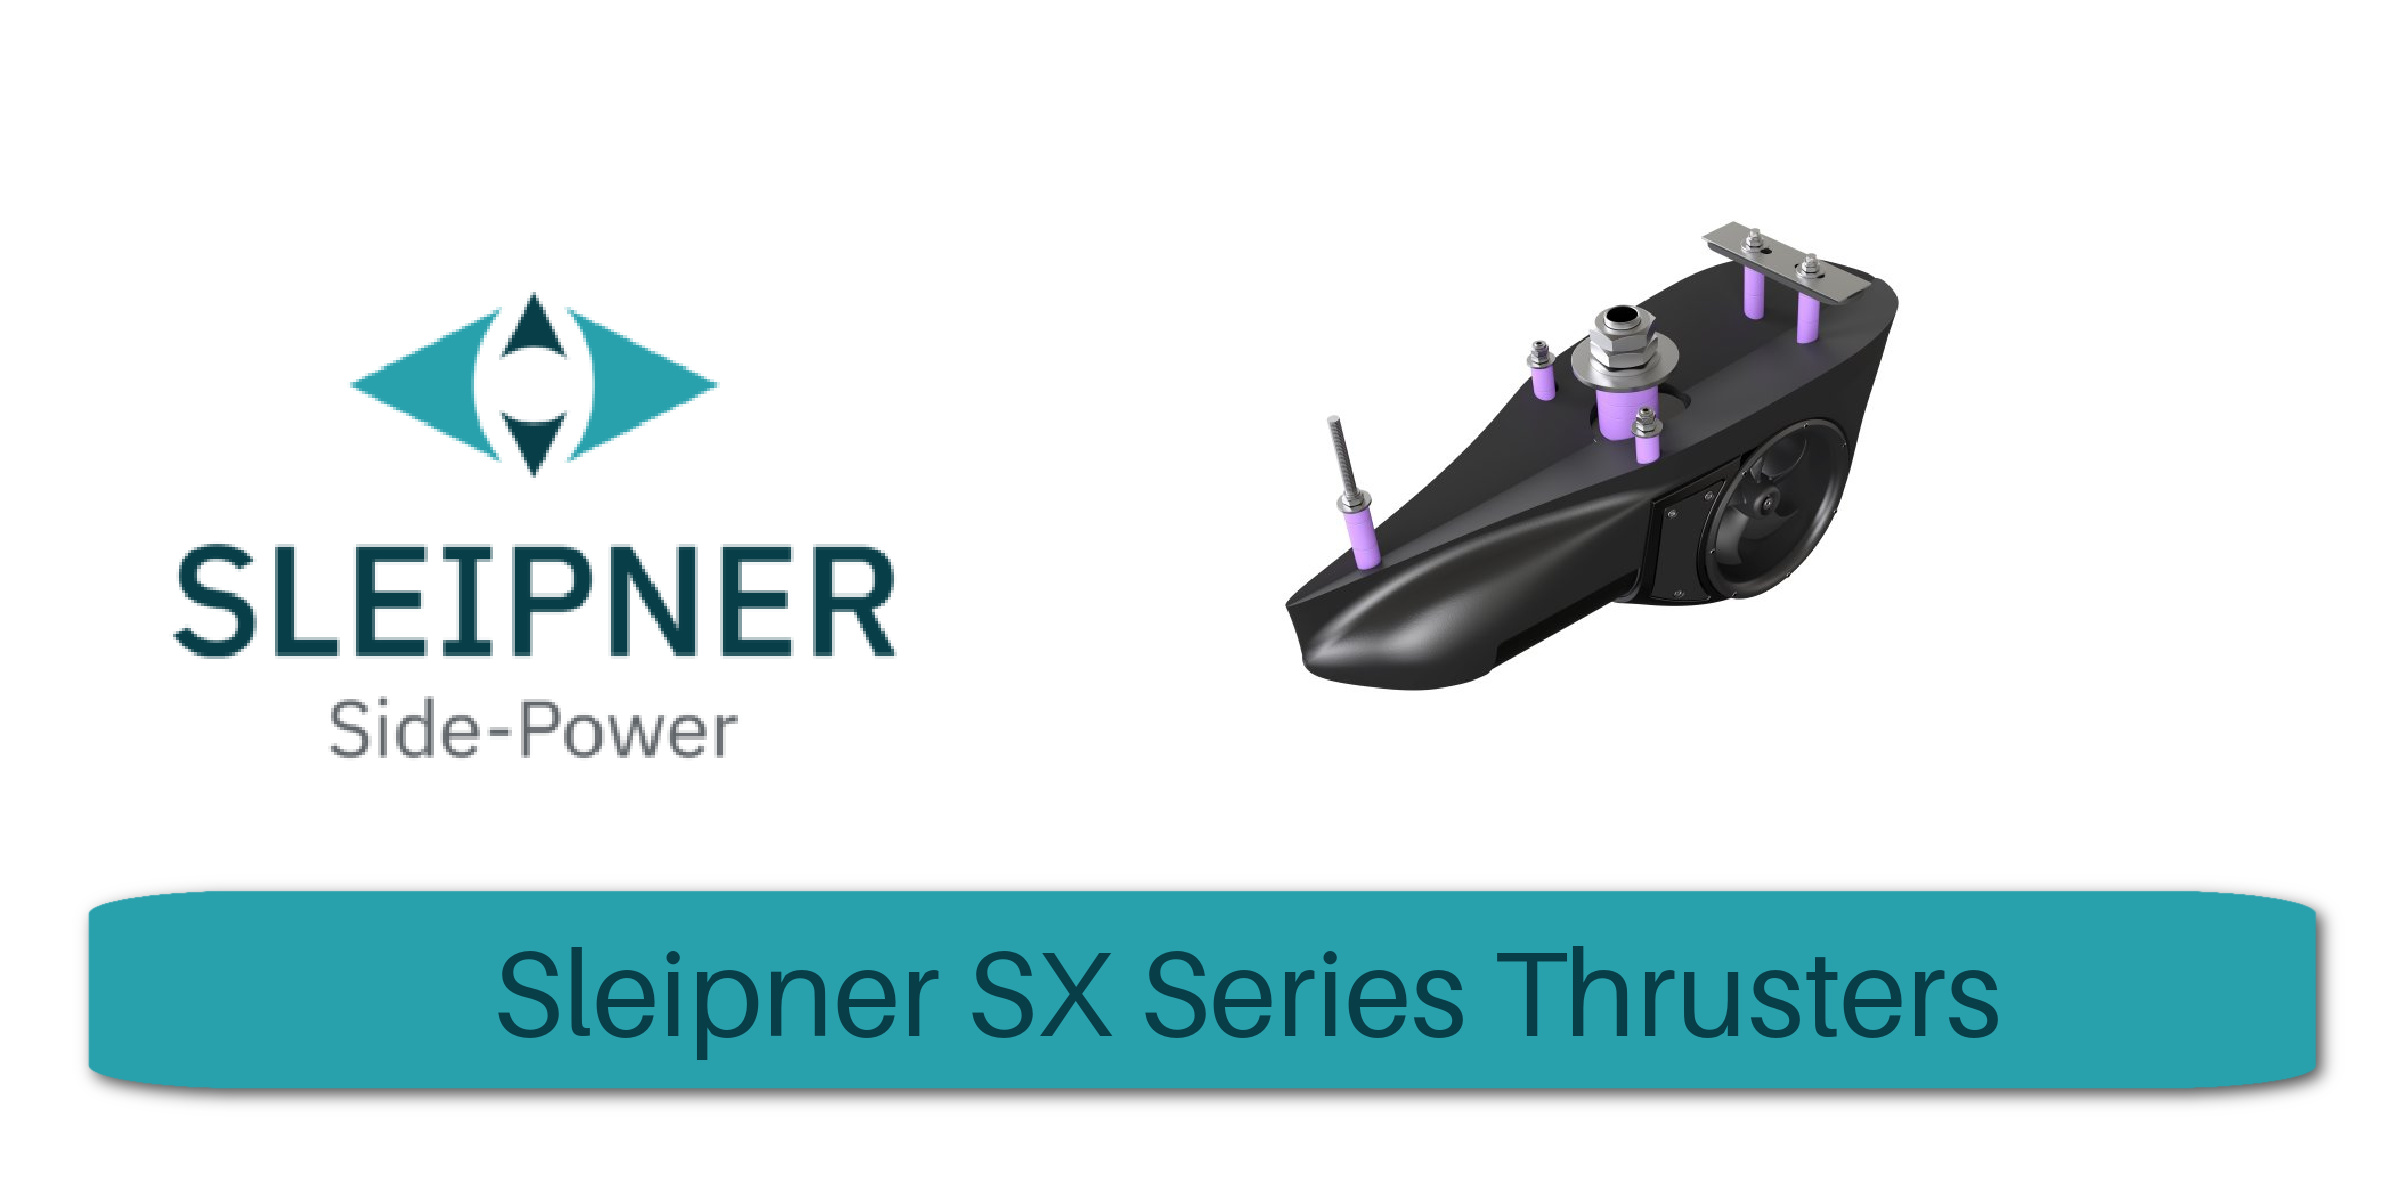 SX Series Thrusters